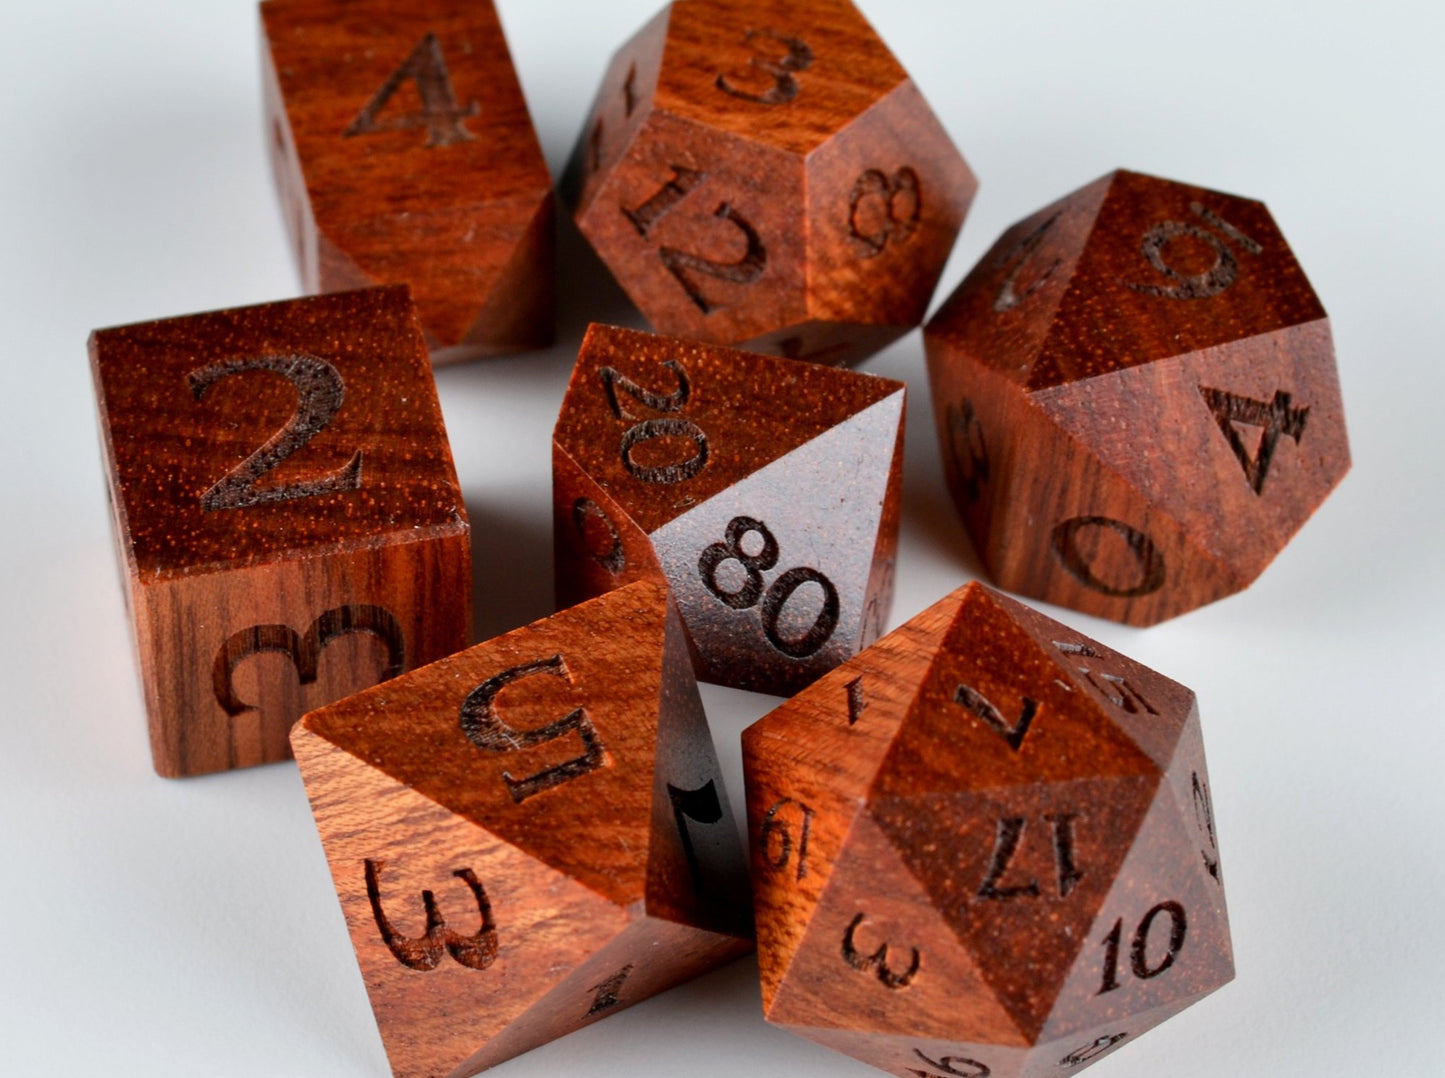 Bloodwood wooden dice set for dungeons and dragons rpg